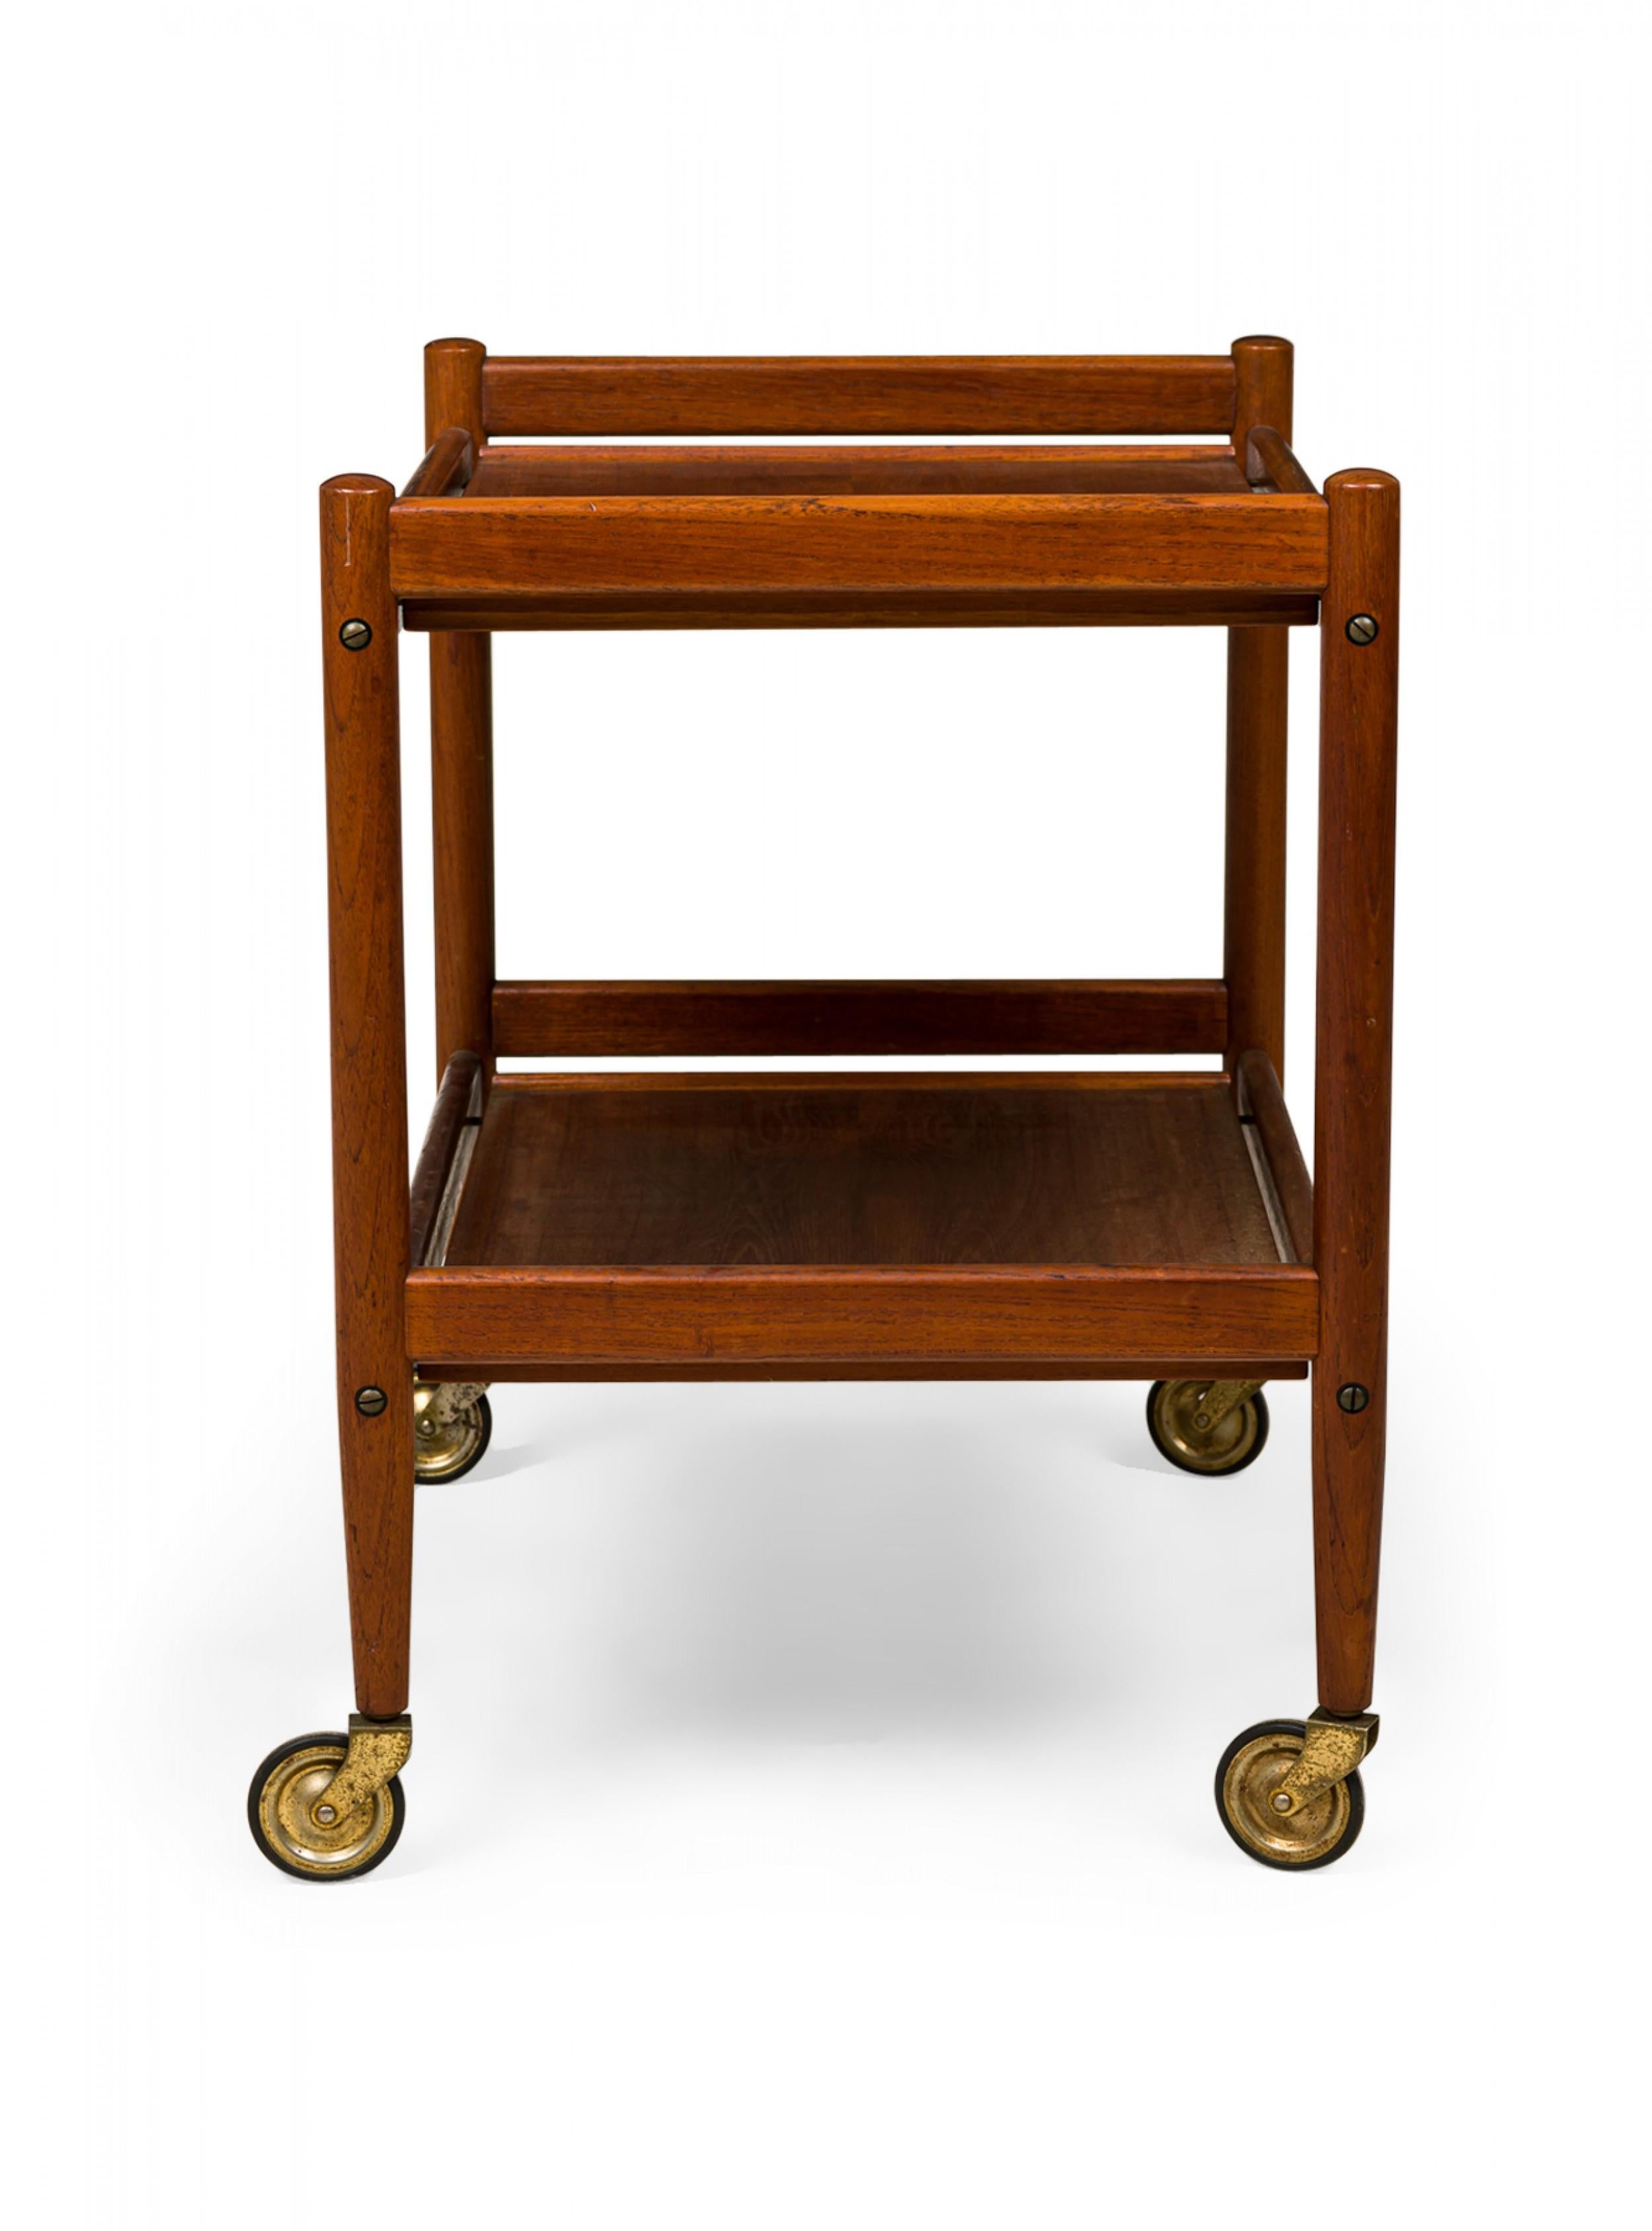 Danish mid-century teak wood serving trolley / tea cart with a rectangular form and two tiers, resting on four casters. (Grete Jalk).